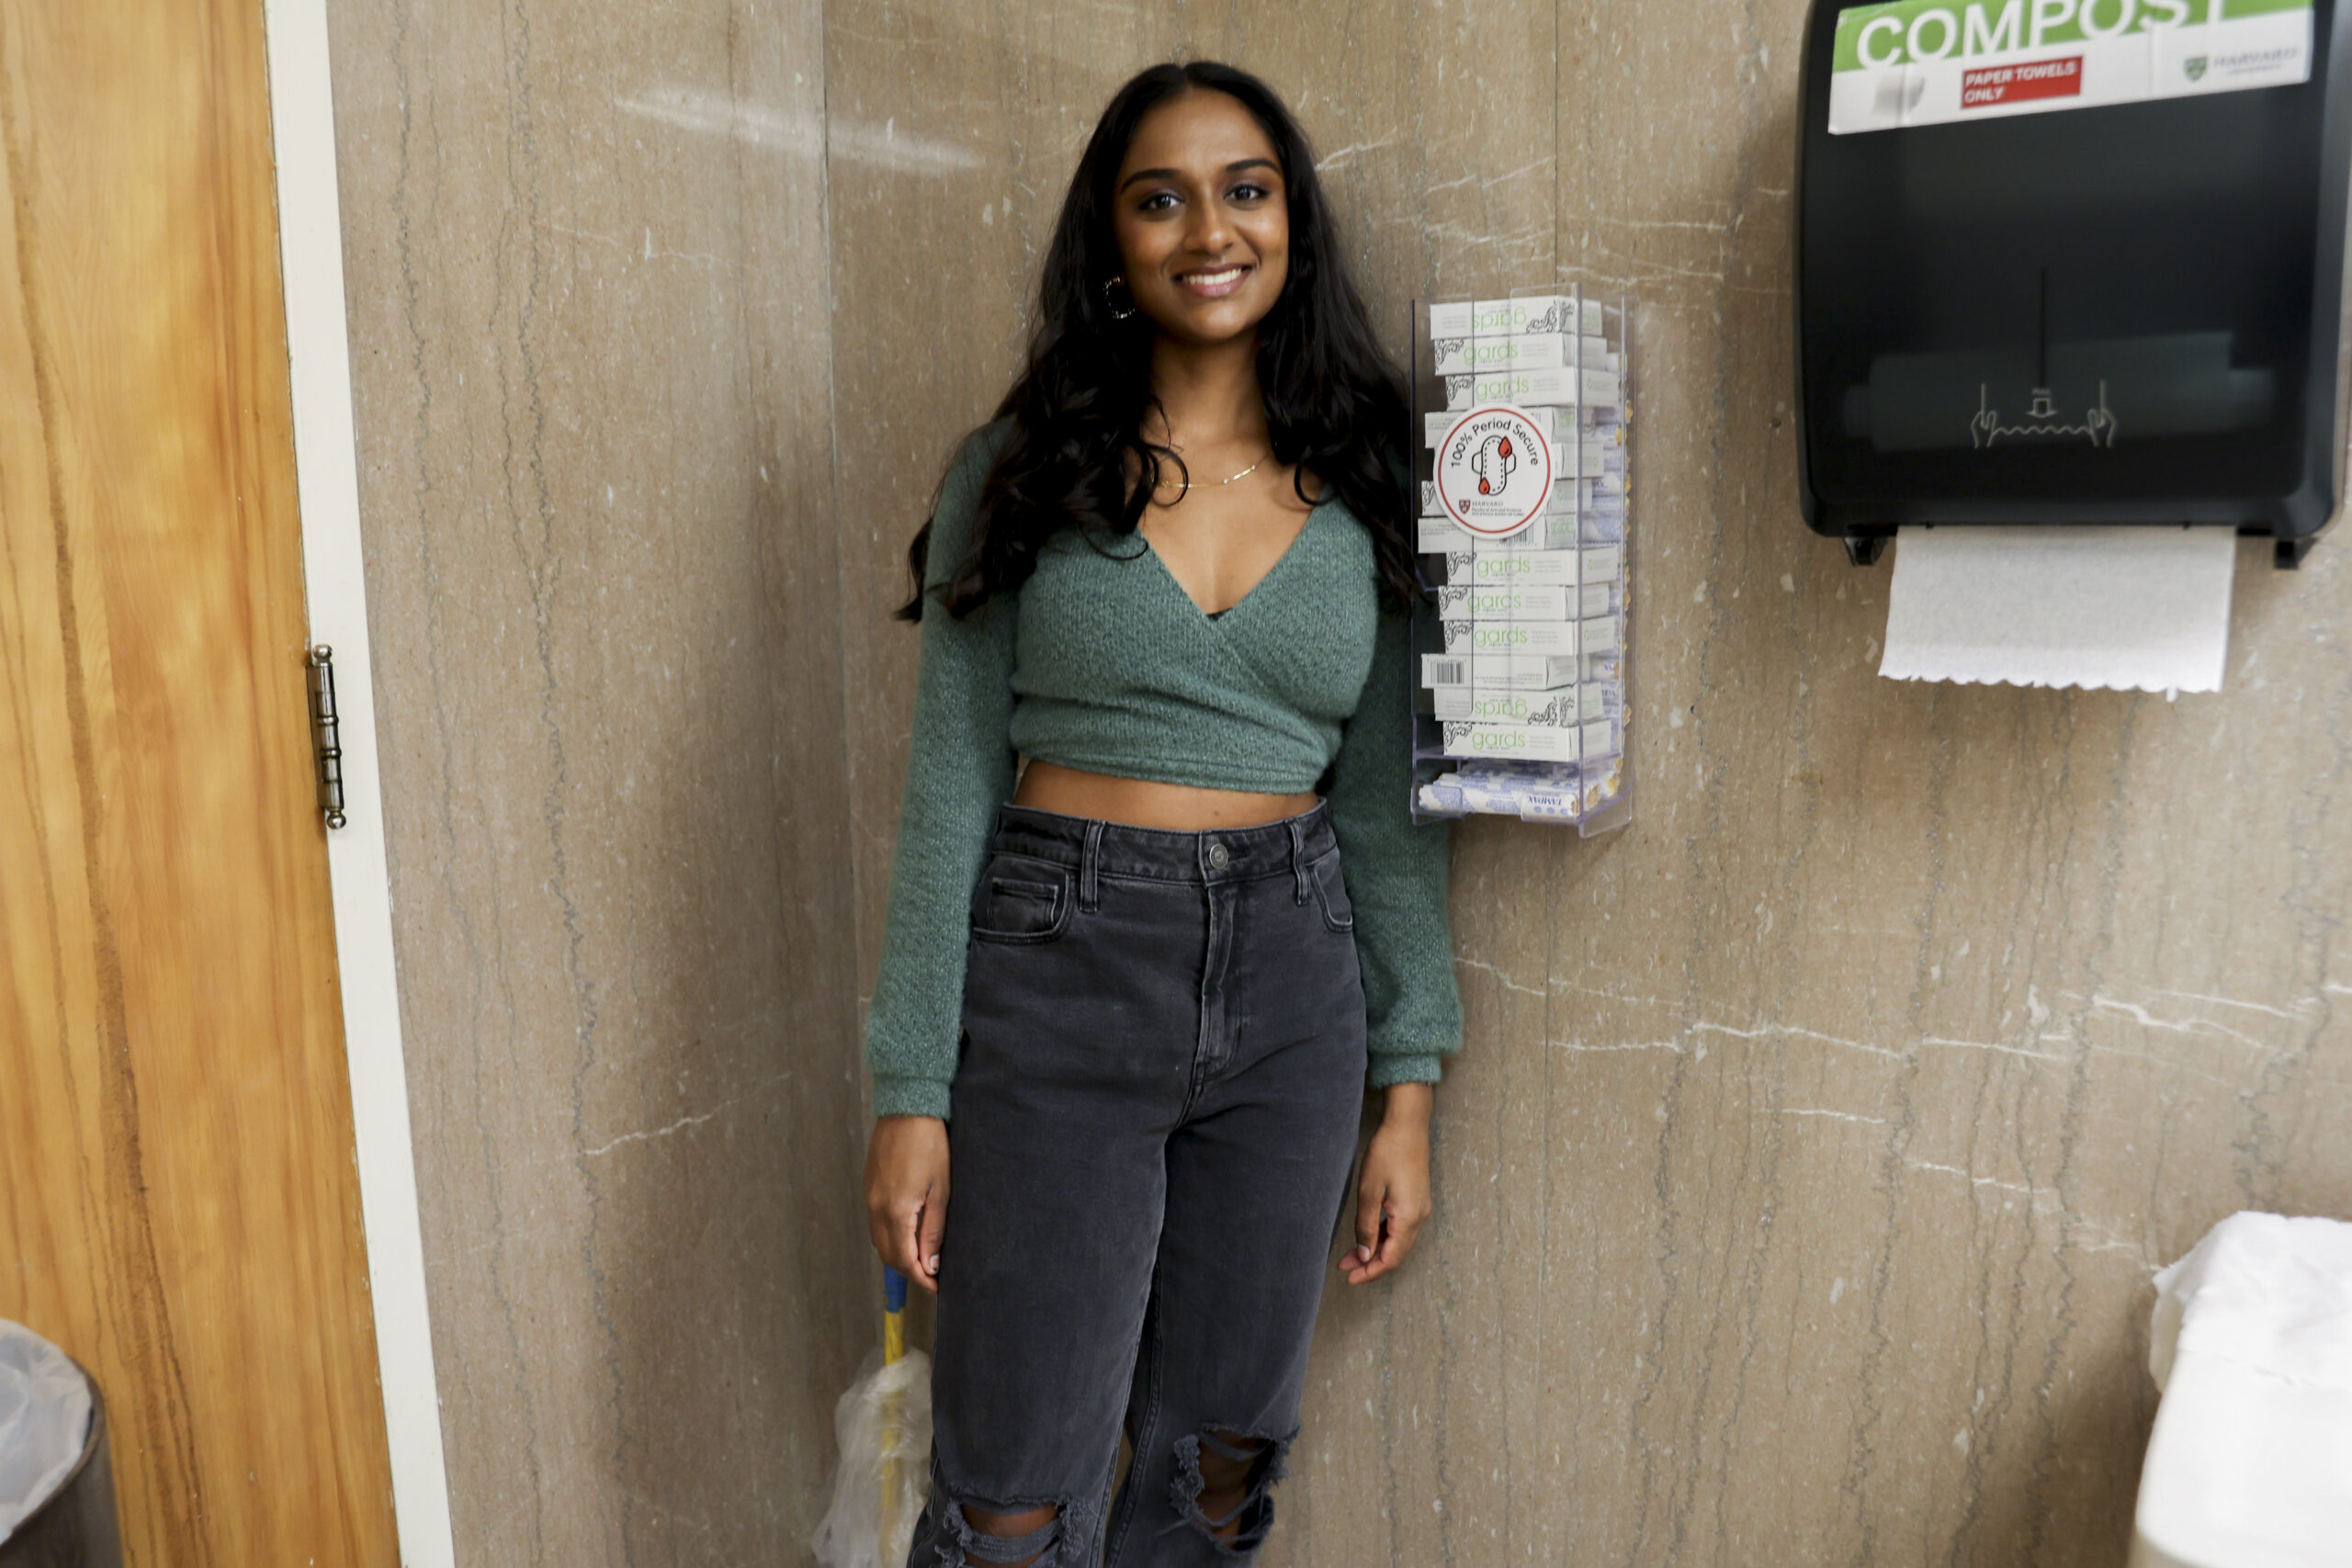 Shruthi Kumar with a newly installed menstrual product dispenser in Lamont Library.